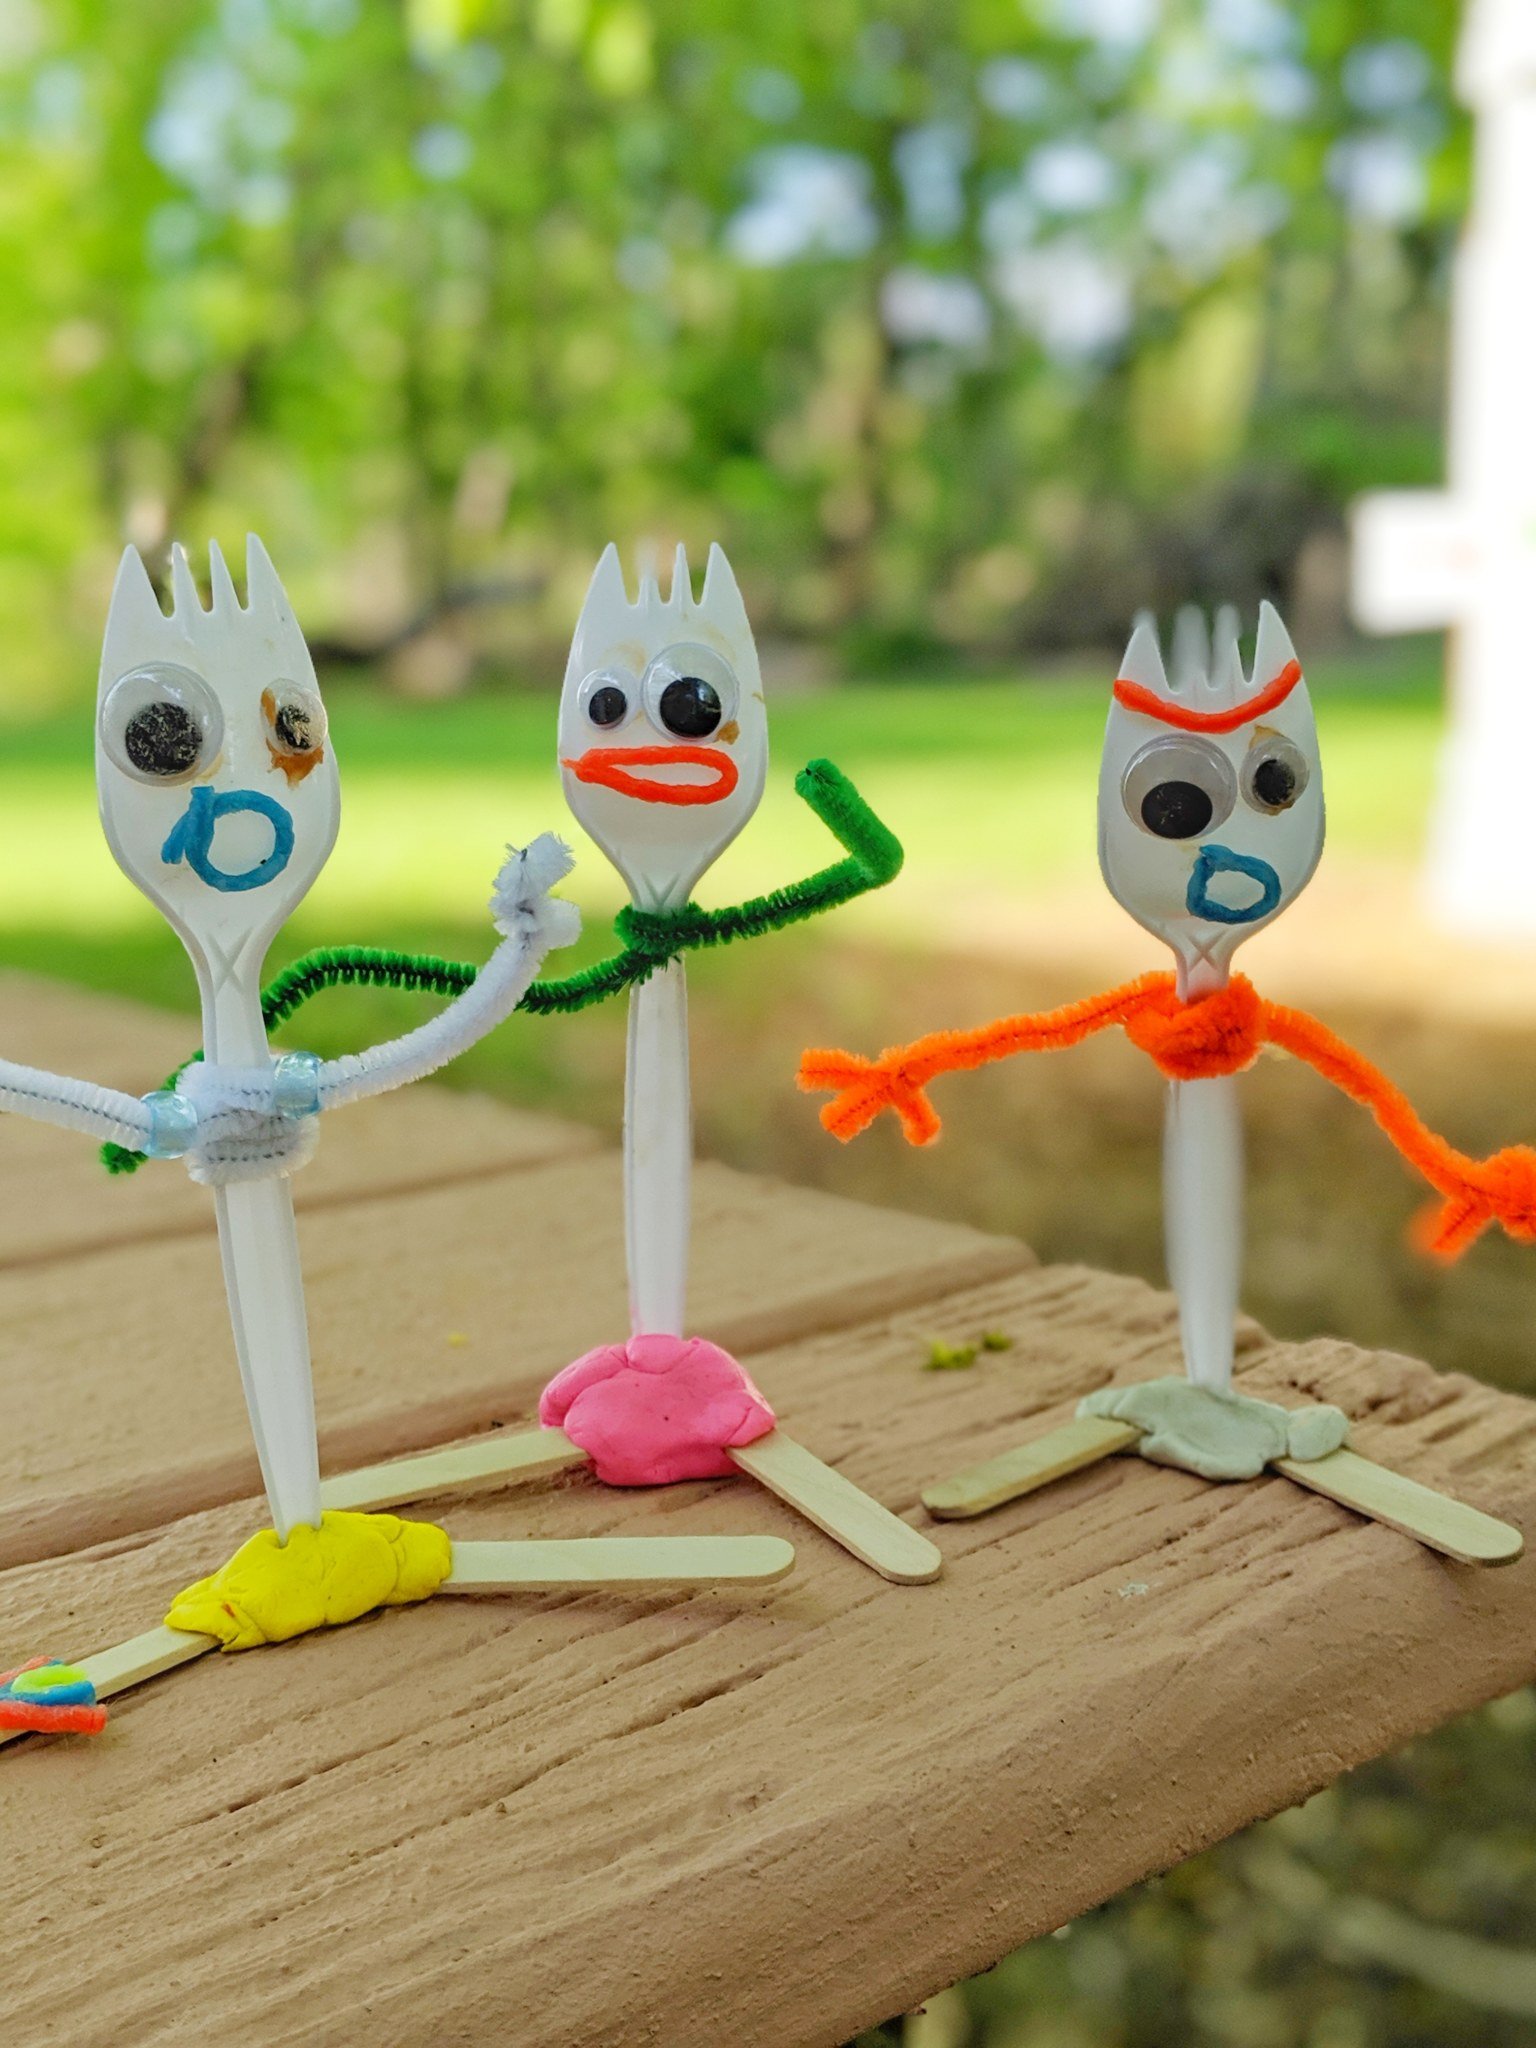 Disney Just Introduced This Spork as the New 'Toy Story' Toy